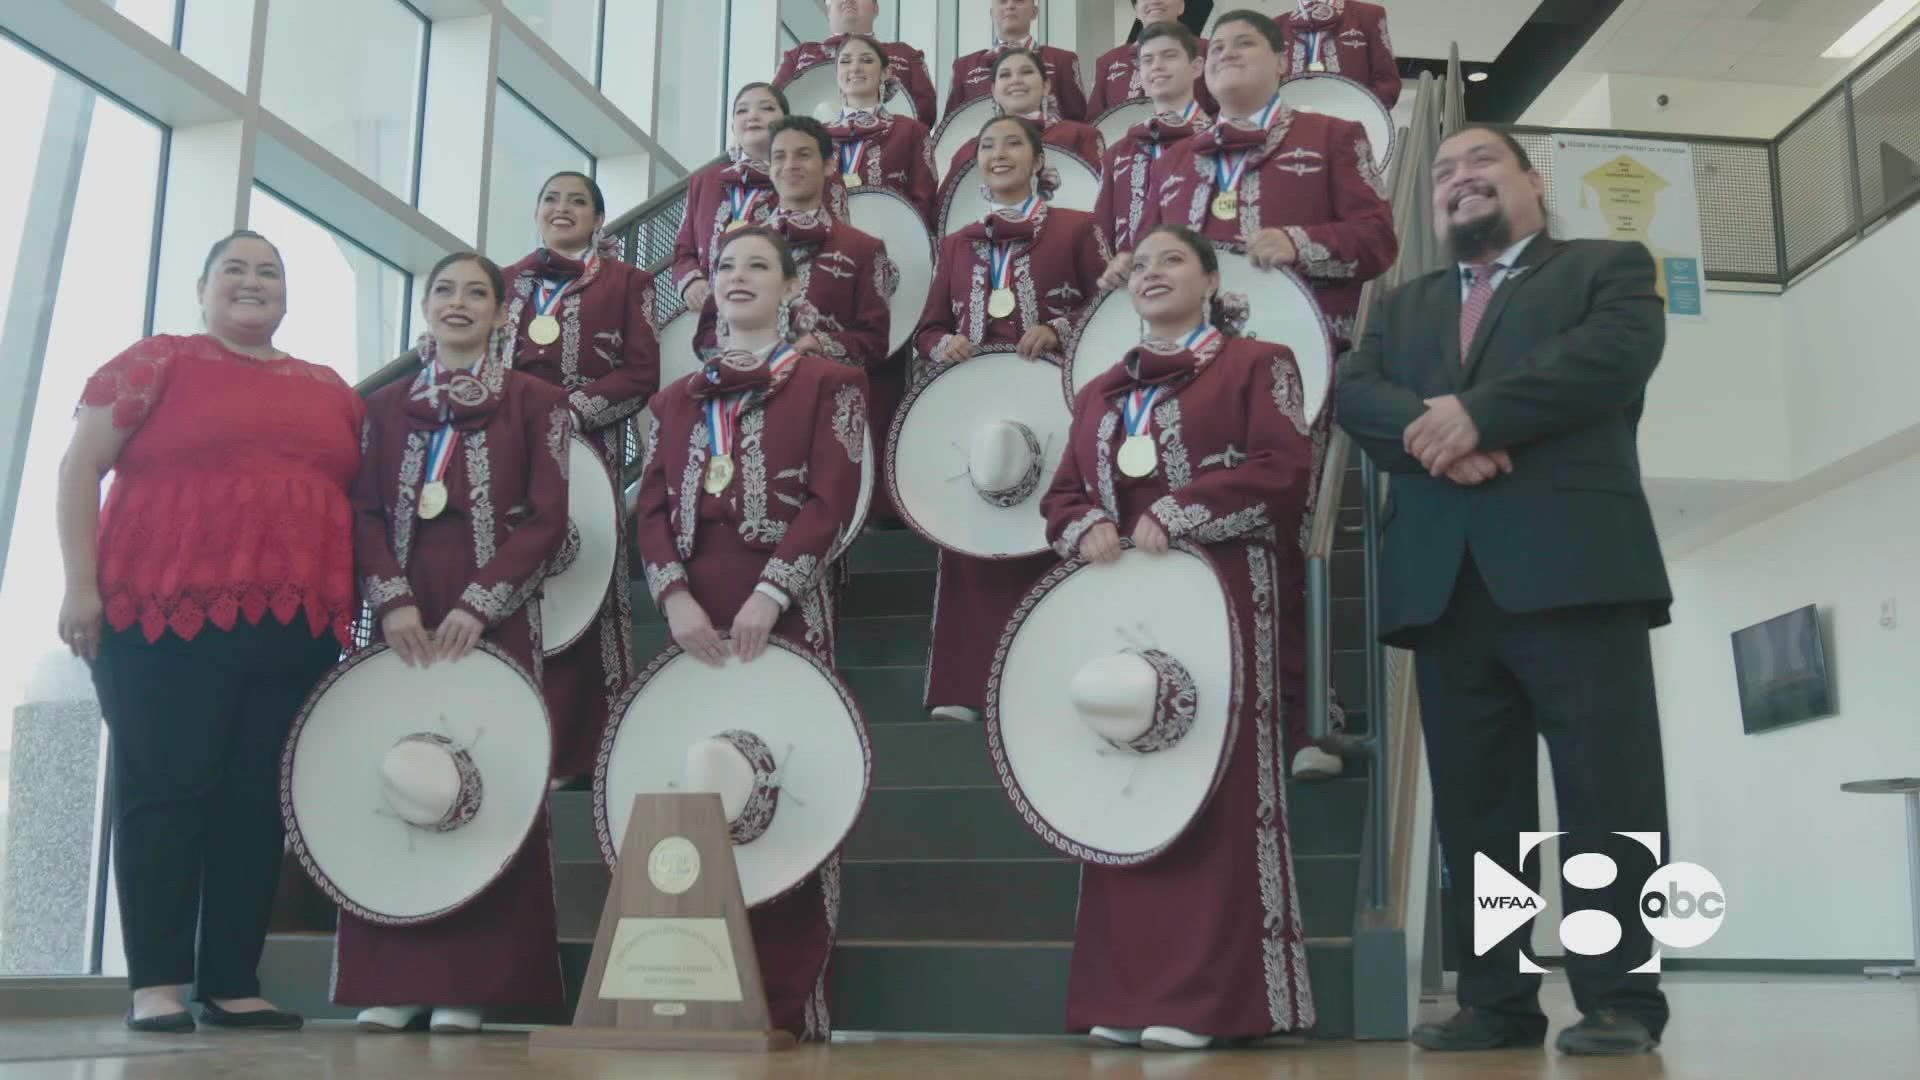 North Side High School in Fort Worth has earned a reputation as one of the state’s most successful mariachi programs.